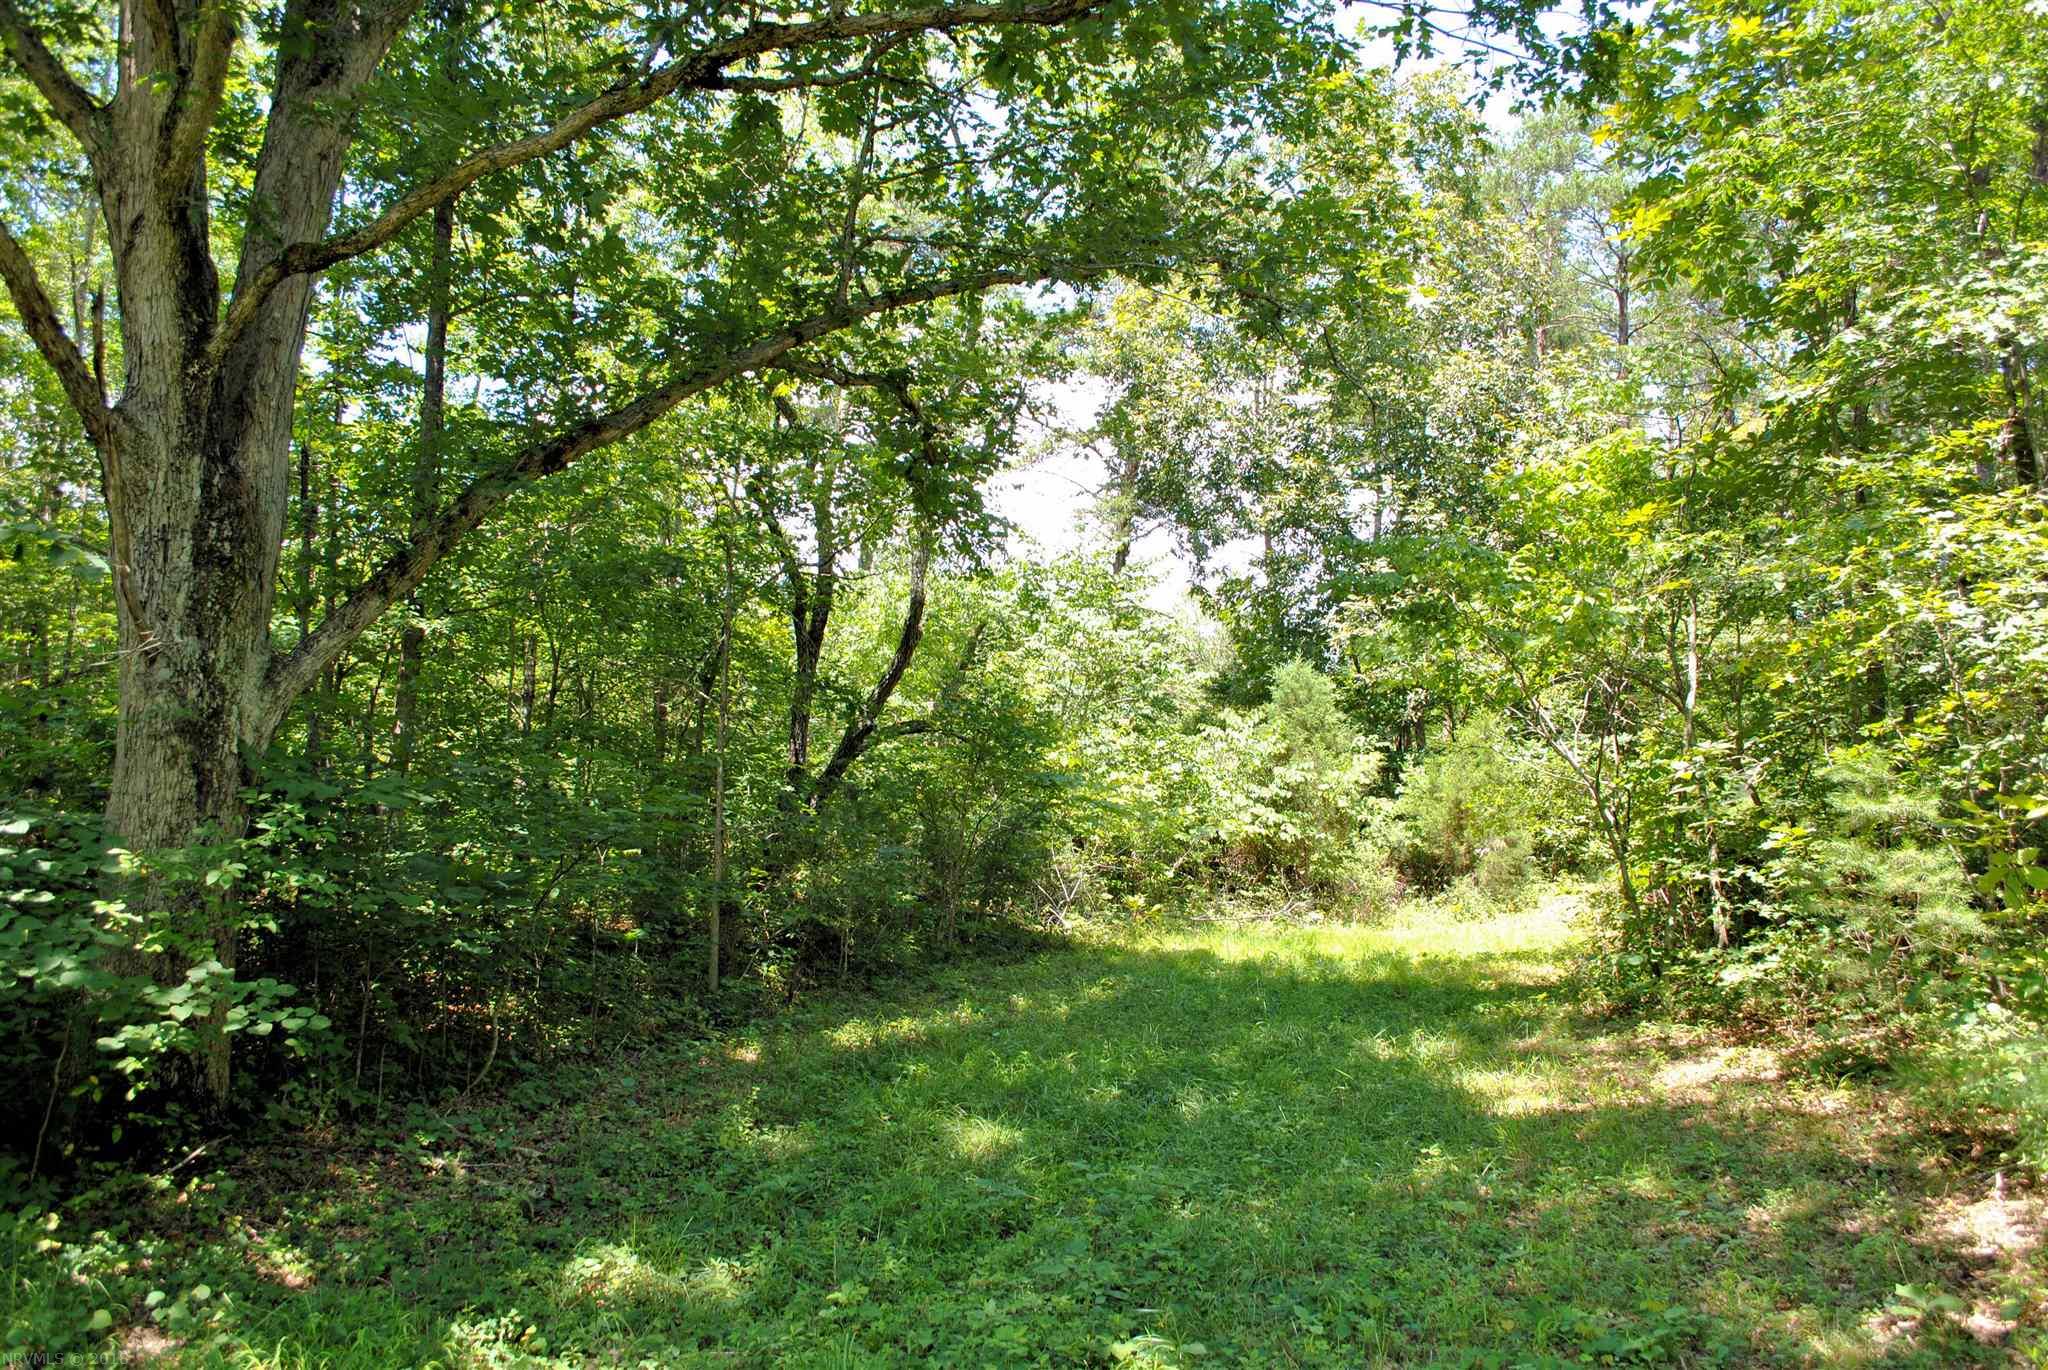 Build your dream home on this gorgeous, wooded 2.565 acre lot in Hickory Knob Subdivision.  The lot has been perked already for a septic system and is ready to be built on.  Underground utilities.  Conveniently located just minutes to I-81 and 20 minutes to Roanoke or Blacksburg & Virginia Tech. Come find your little piece of heaven!